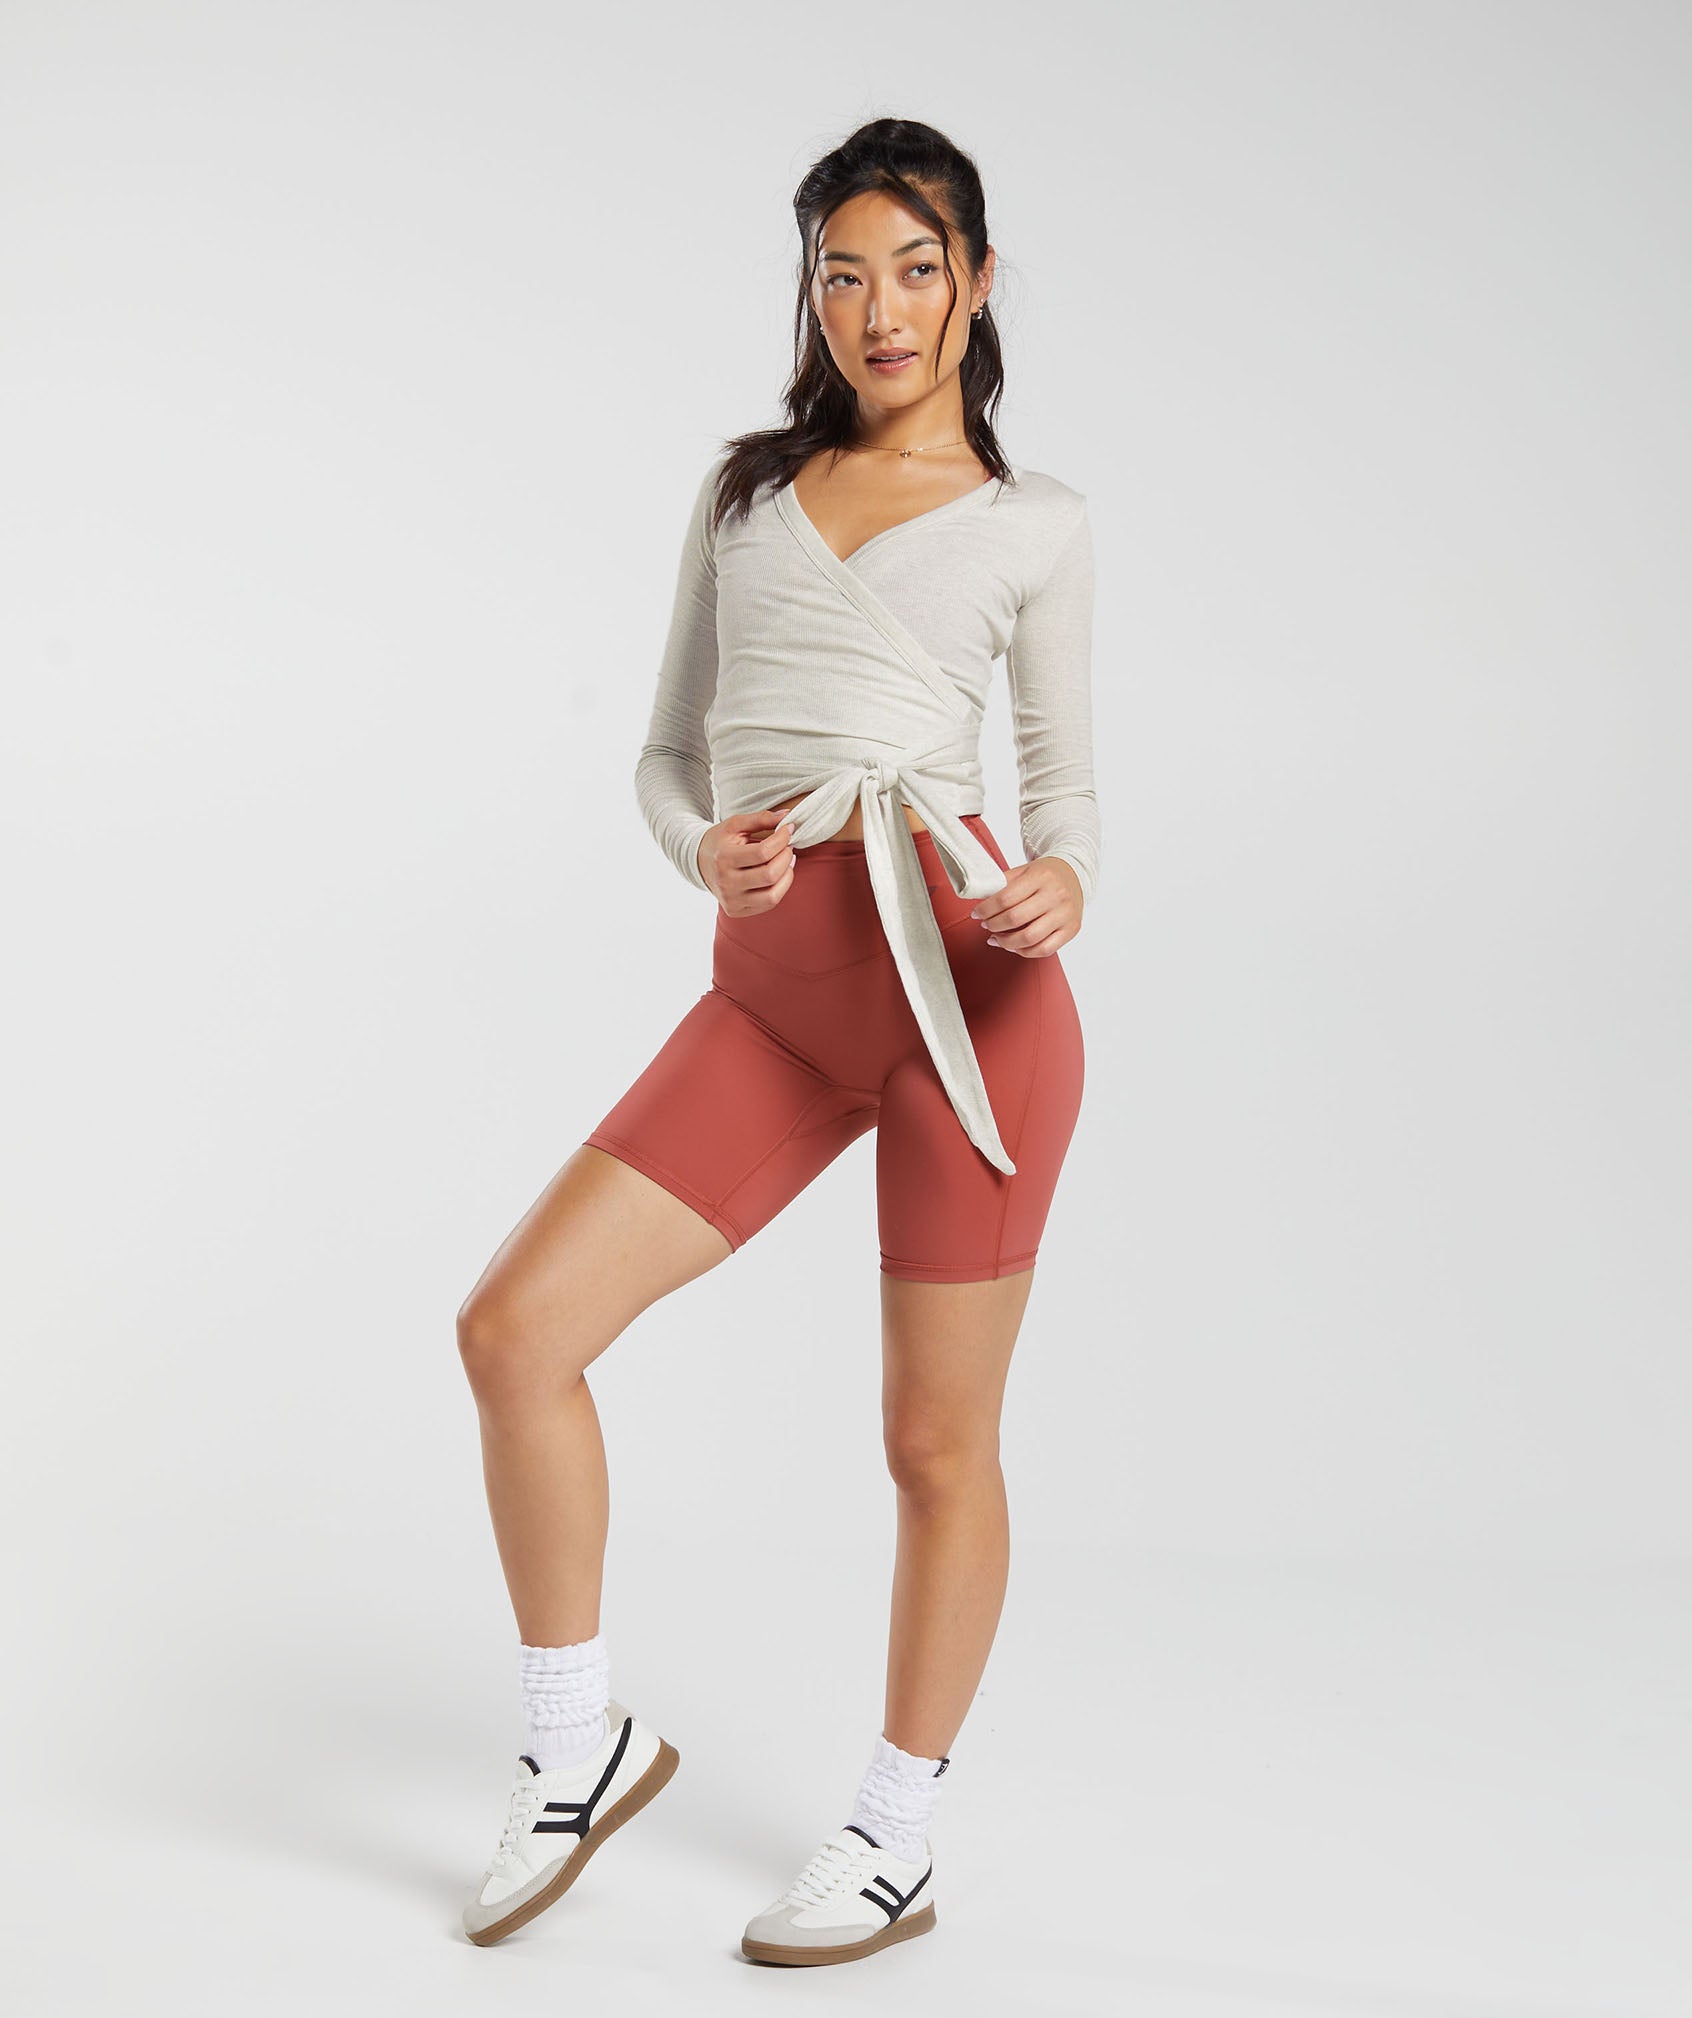 Elevate Wrap Long Sleeve Top in Frost White Marl - view 7